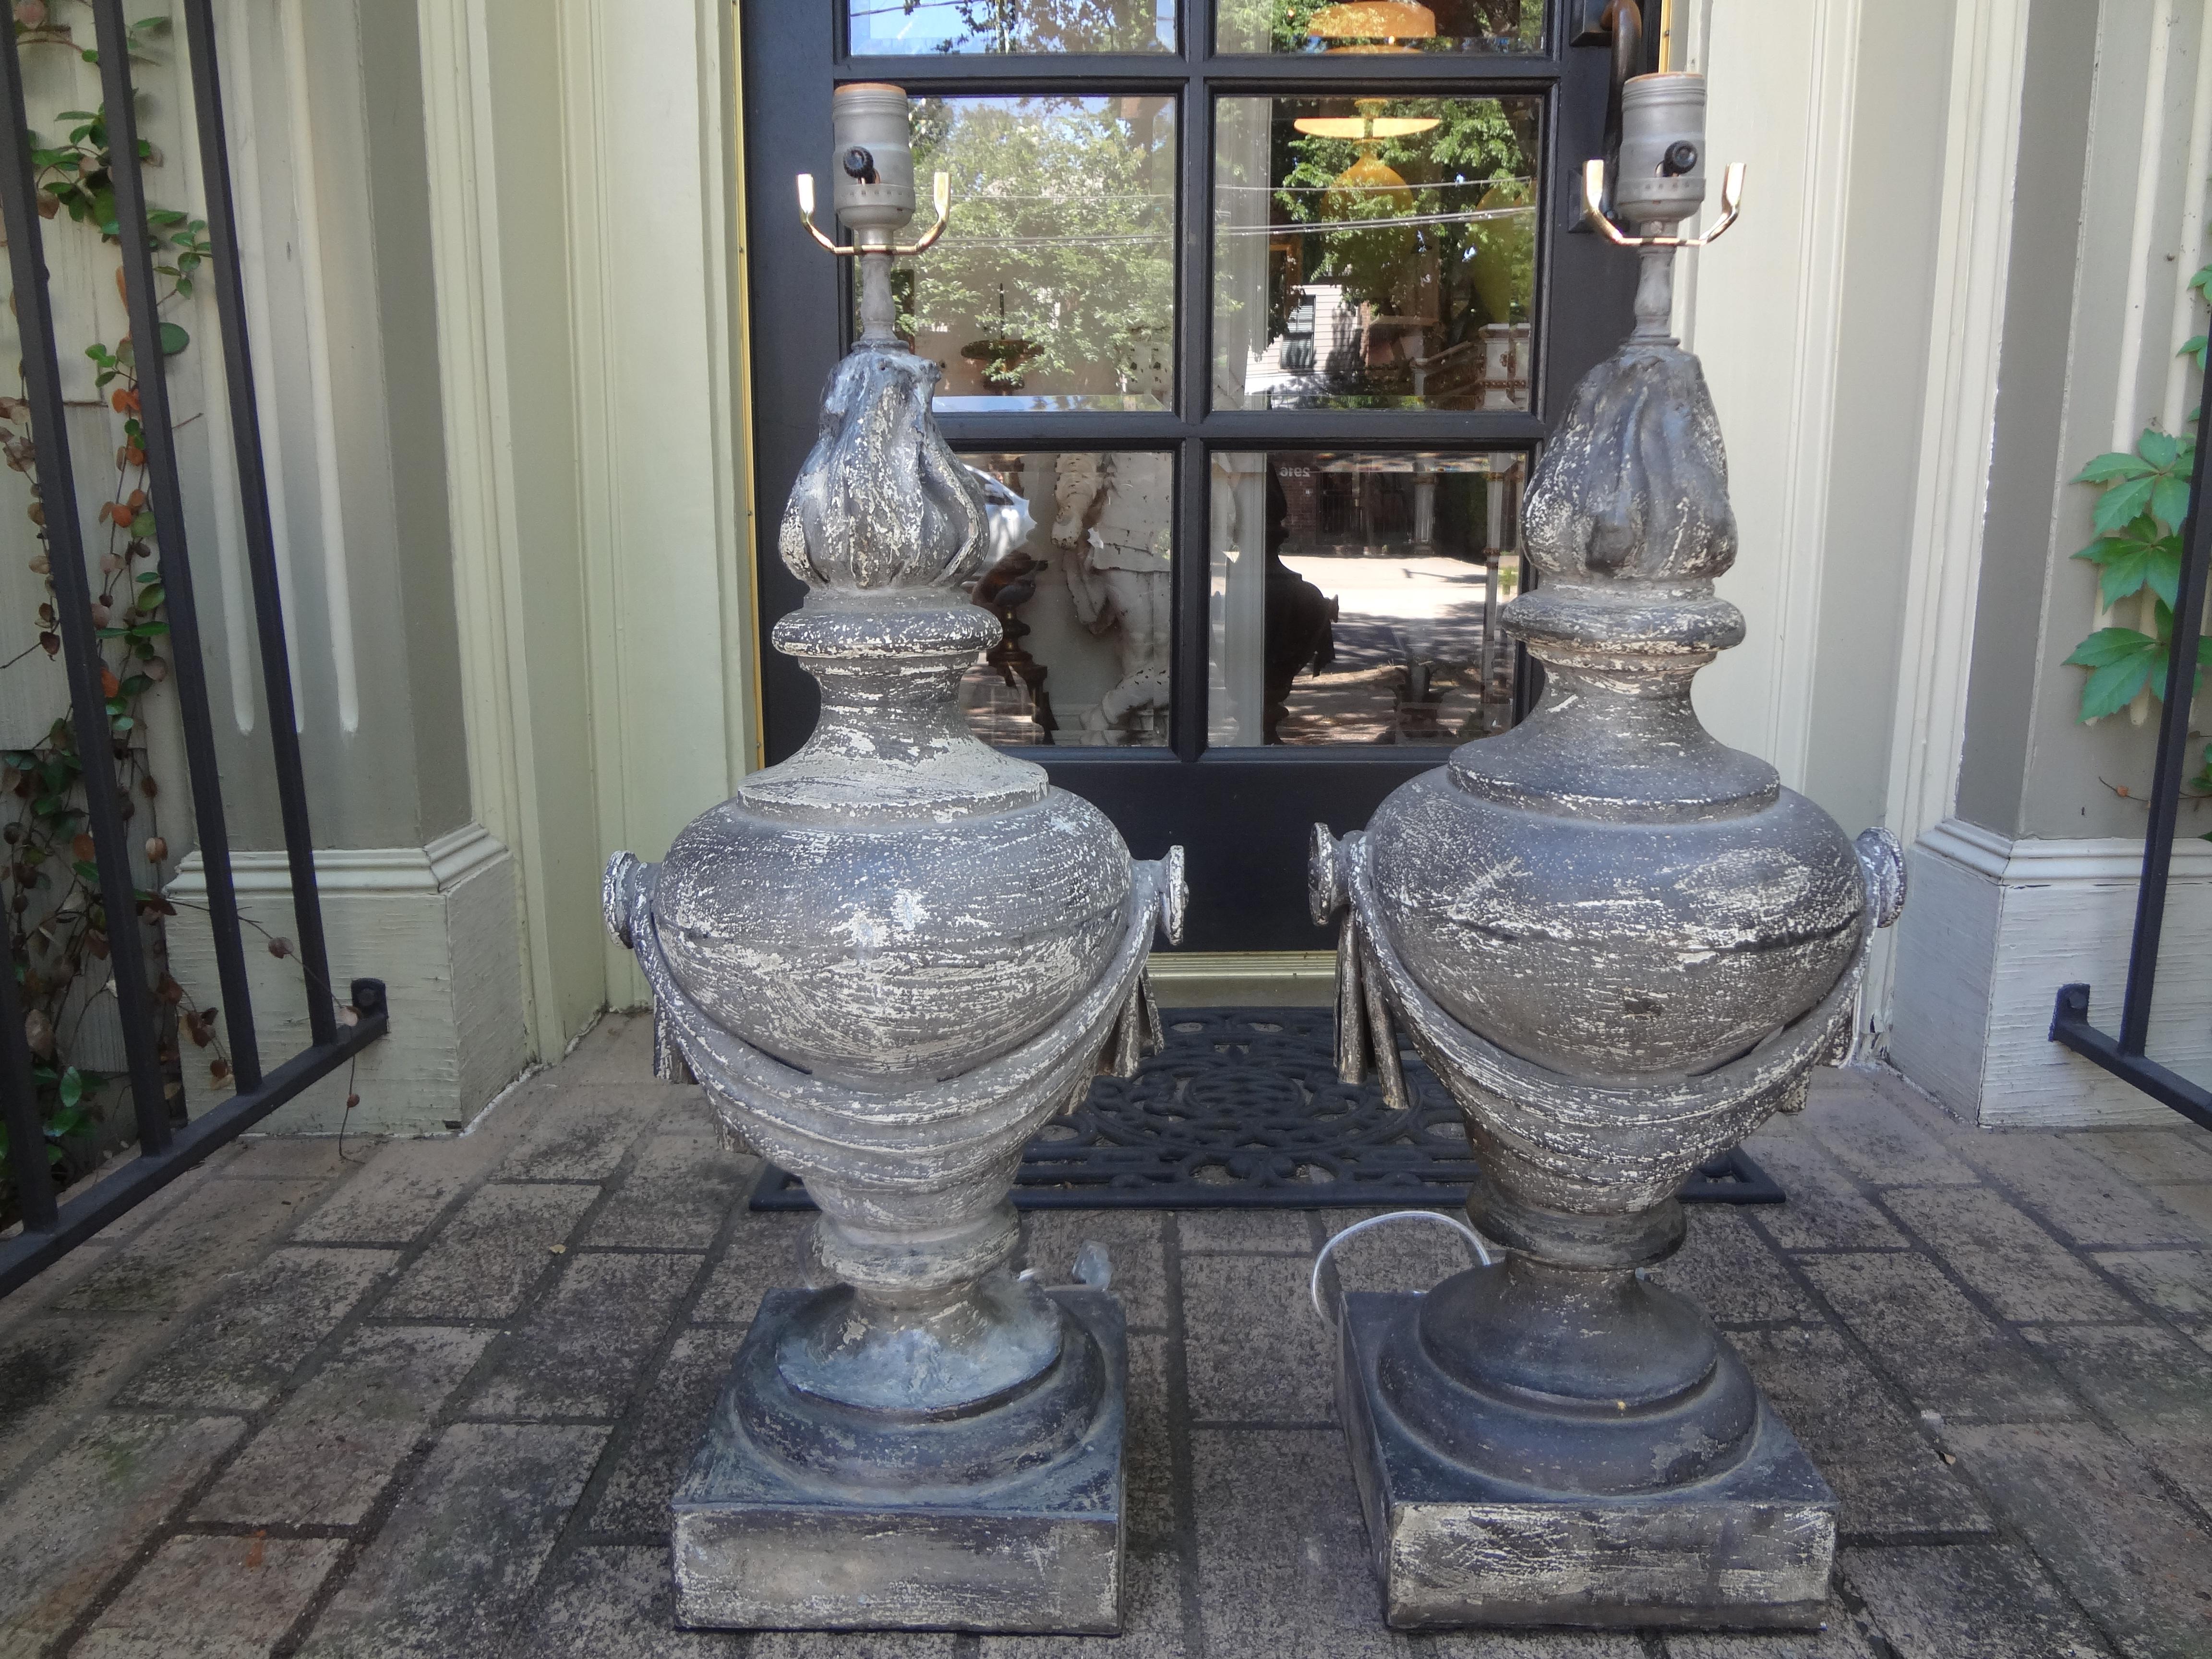 Pair of French neoclassical style zinc lamps.
Stunning large pair of French Neoclassical style zinc lamps. These French zinc lamps have a draped design terminating in side medallions. Our zinc lamps have been newly wired to U.S. specifications with